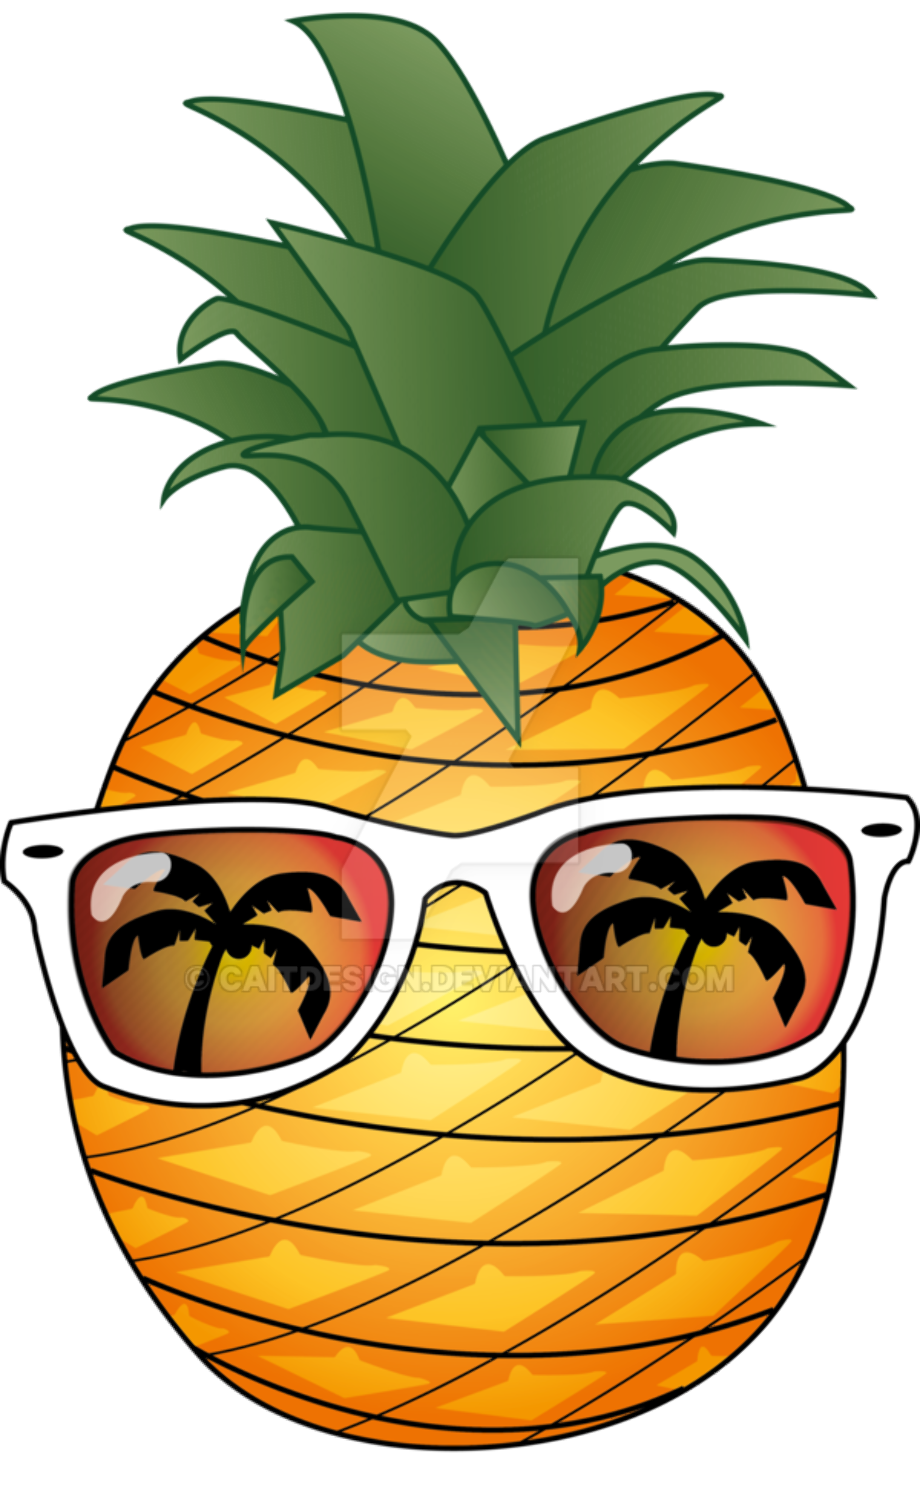 Download High Quality hawaii clipart pineapple Transparent PNG Images